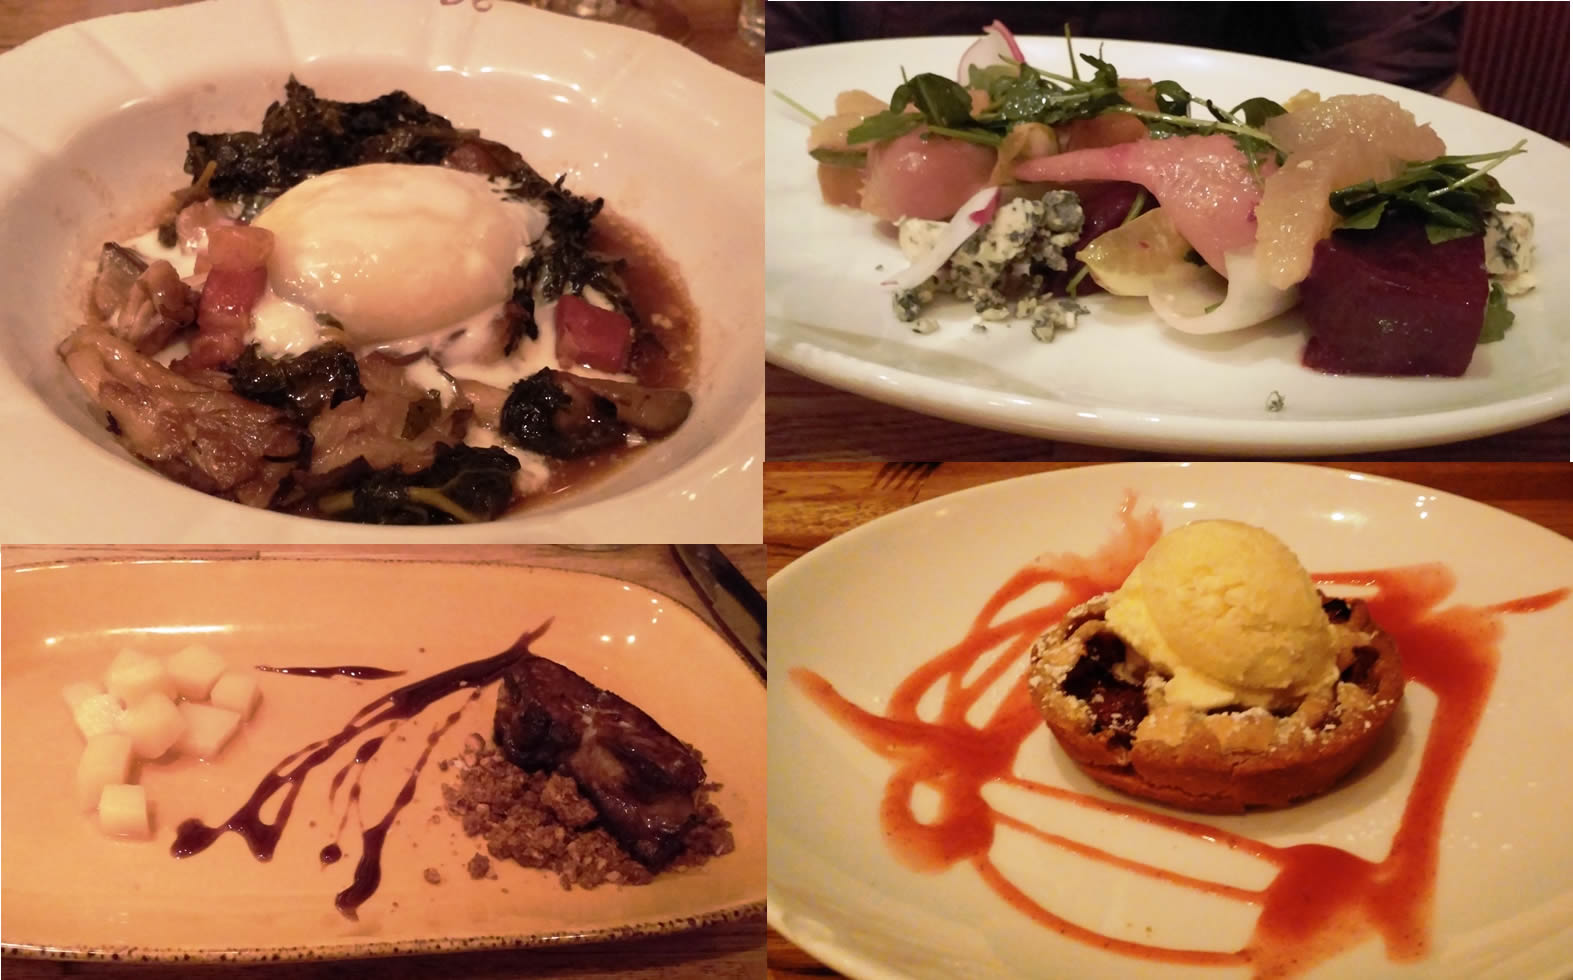 Bistro Vivant in McLean, VA Showcases Welcoming, At-Home French Fare